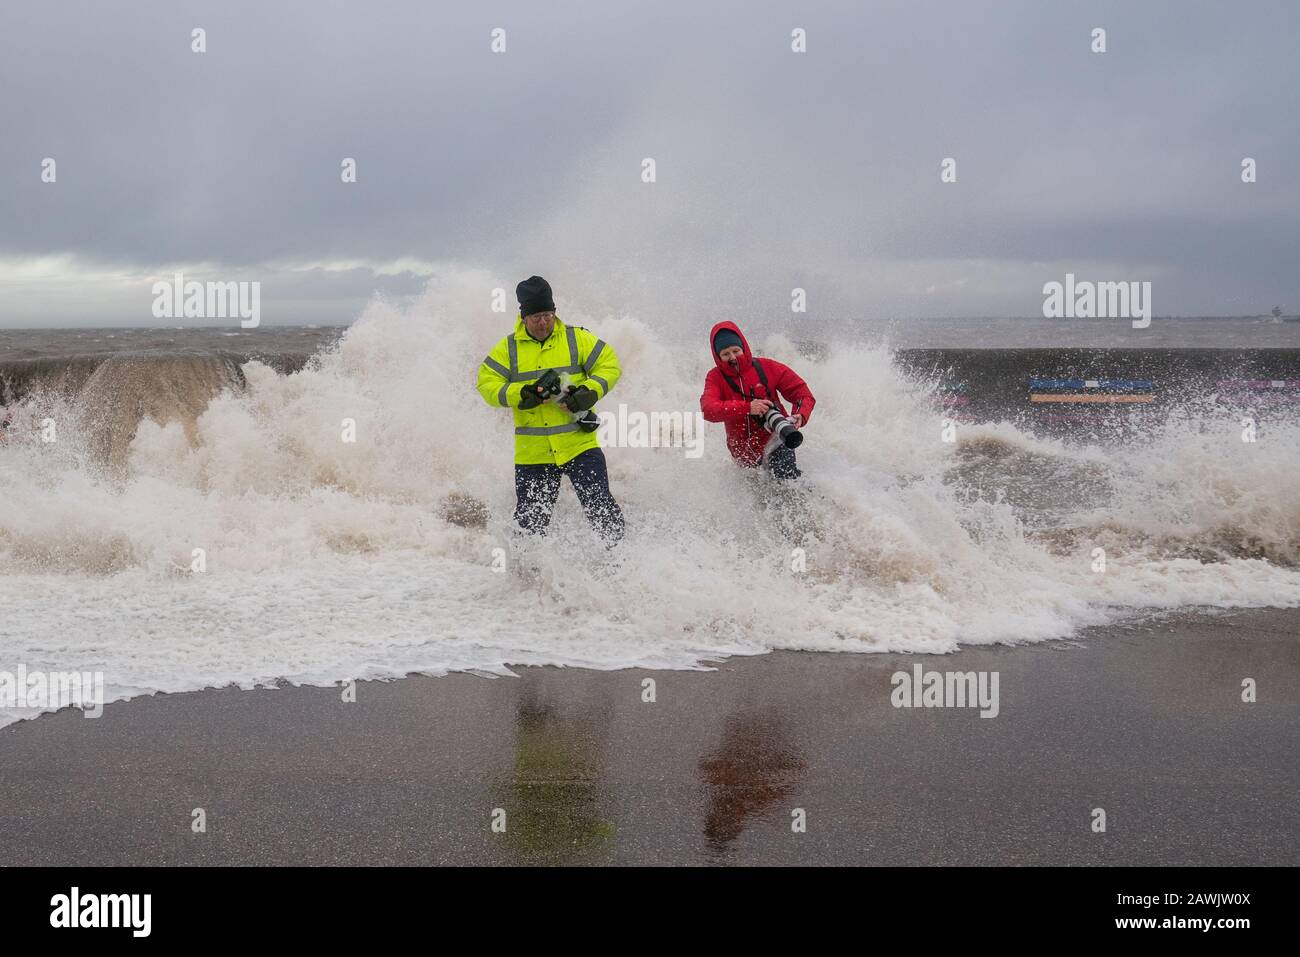 New Brighton, Wirral, UK. 9th Feb, 2020. Photographers take the opportunity to try and capture the waves caused by Storm Ciara, as they crash into the promenade at New Brighton on the Wirral. One photographer is swept off their feet by the waves crashing over the promenade wall. Credit: Christopher Middleton/Alamy Live News Stock Photo